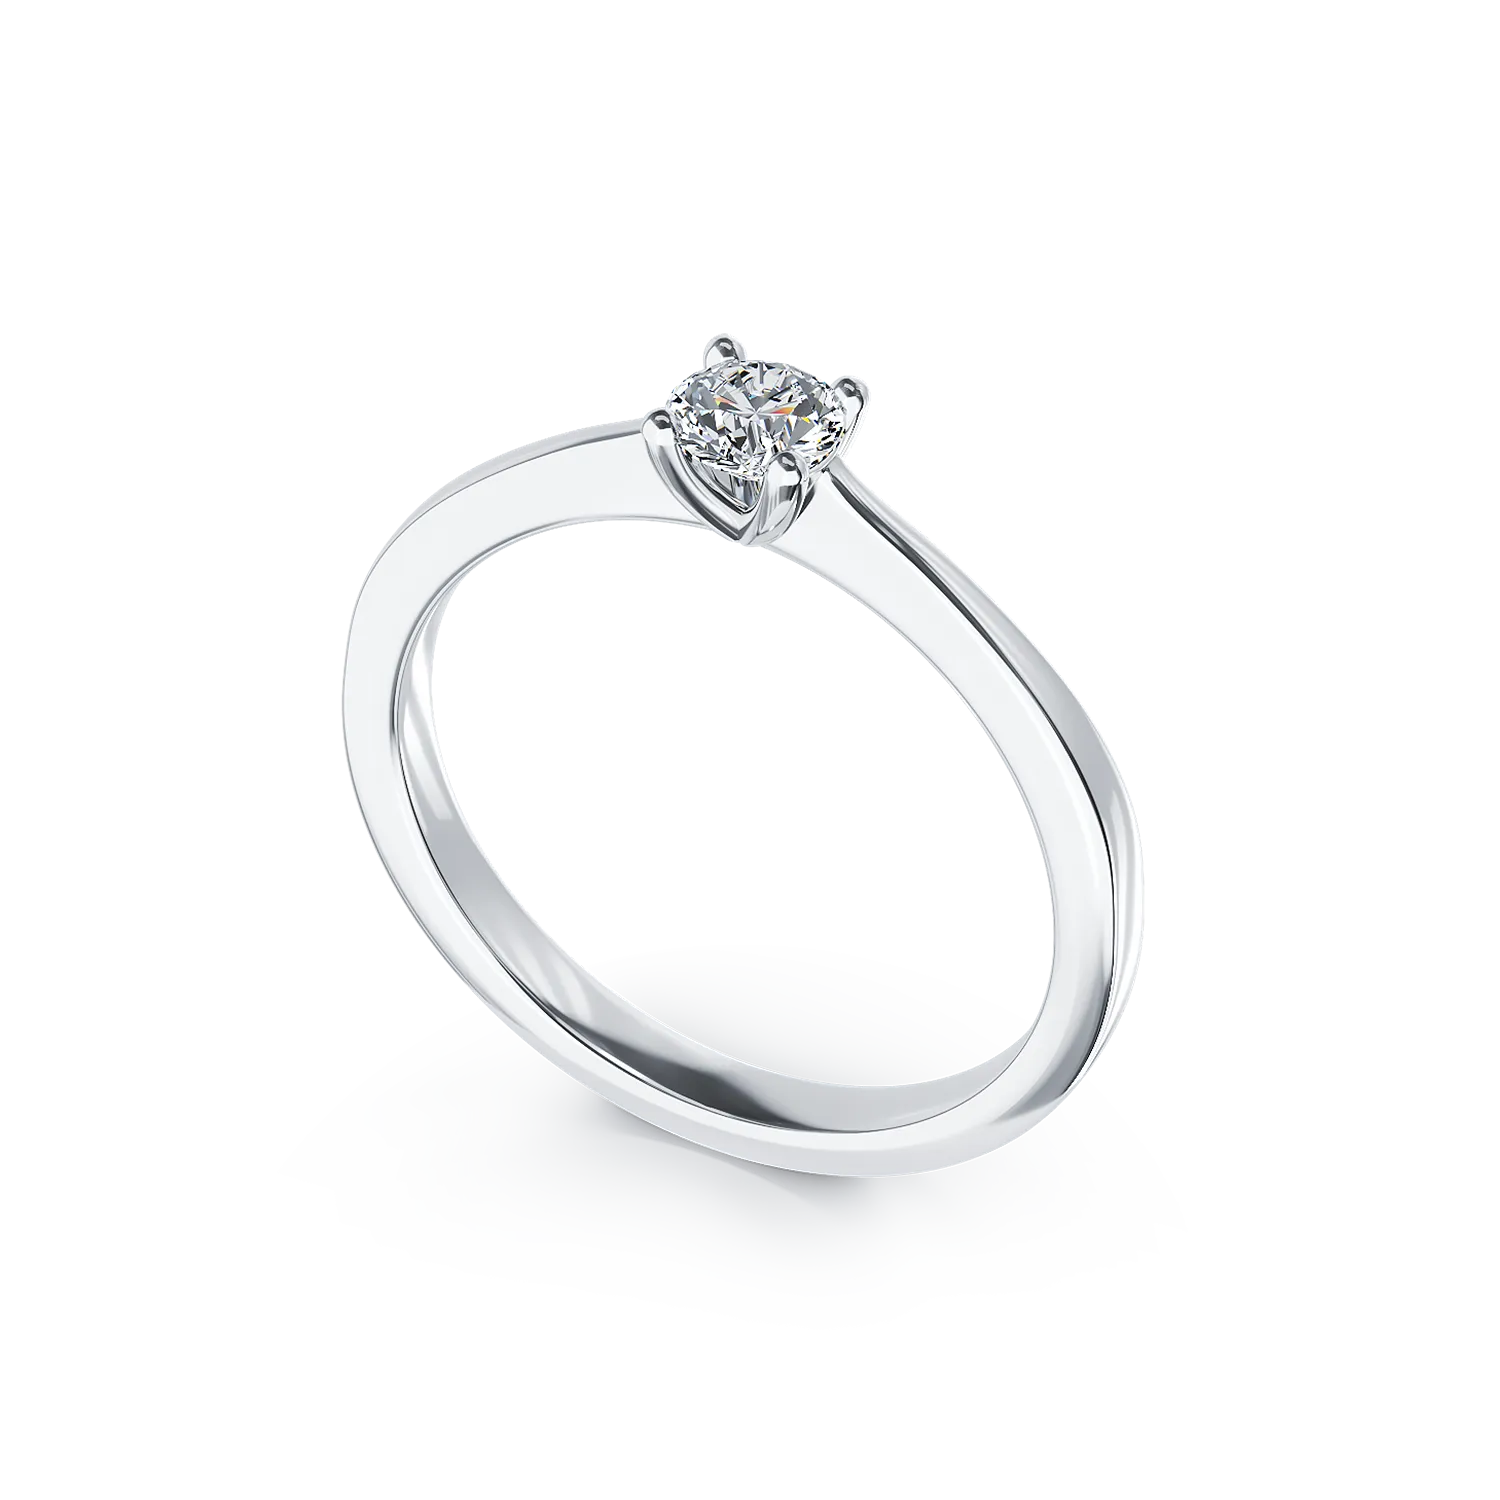 18K white gold engagement ring with 0.25ct solitaire diamond